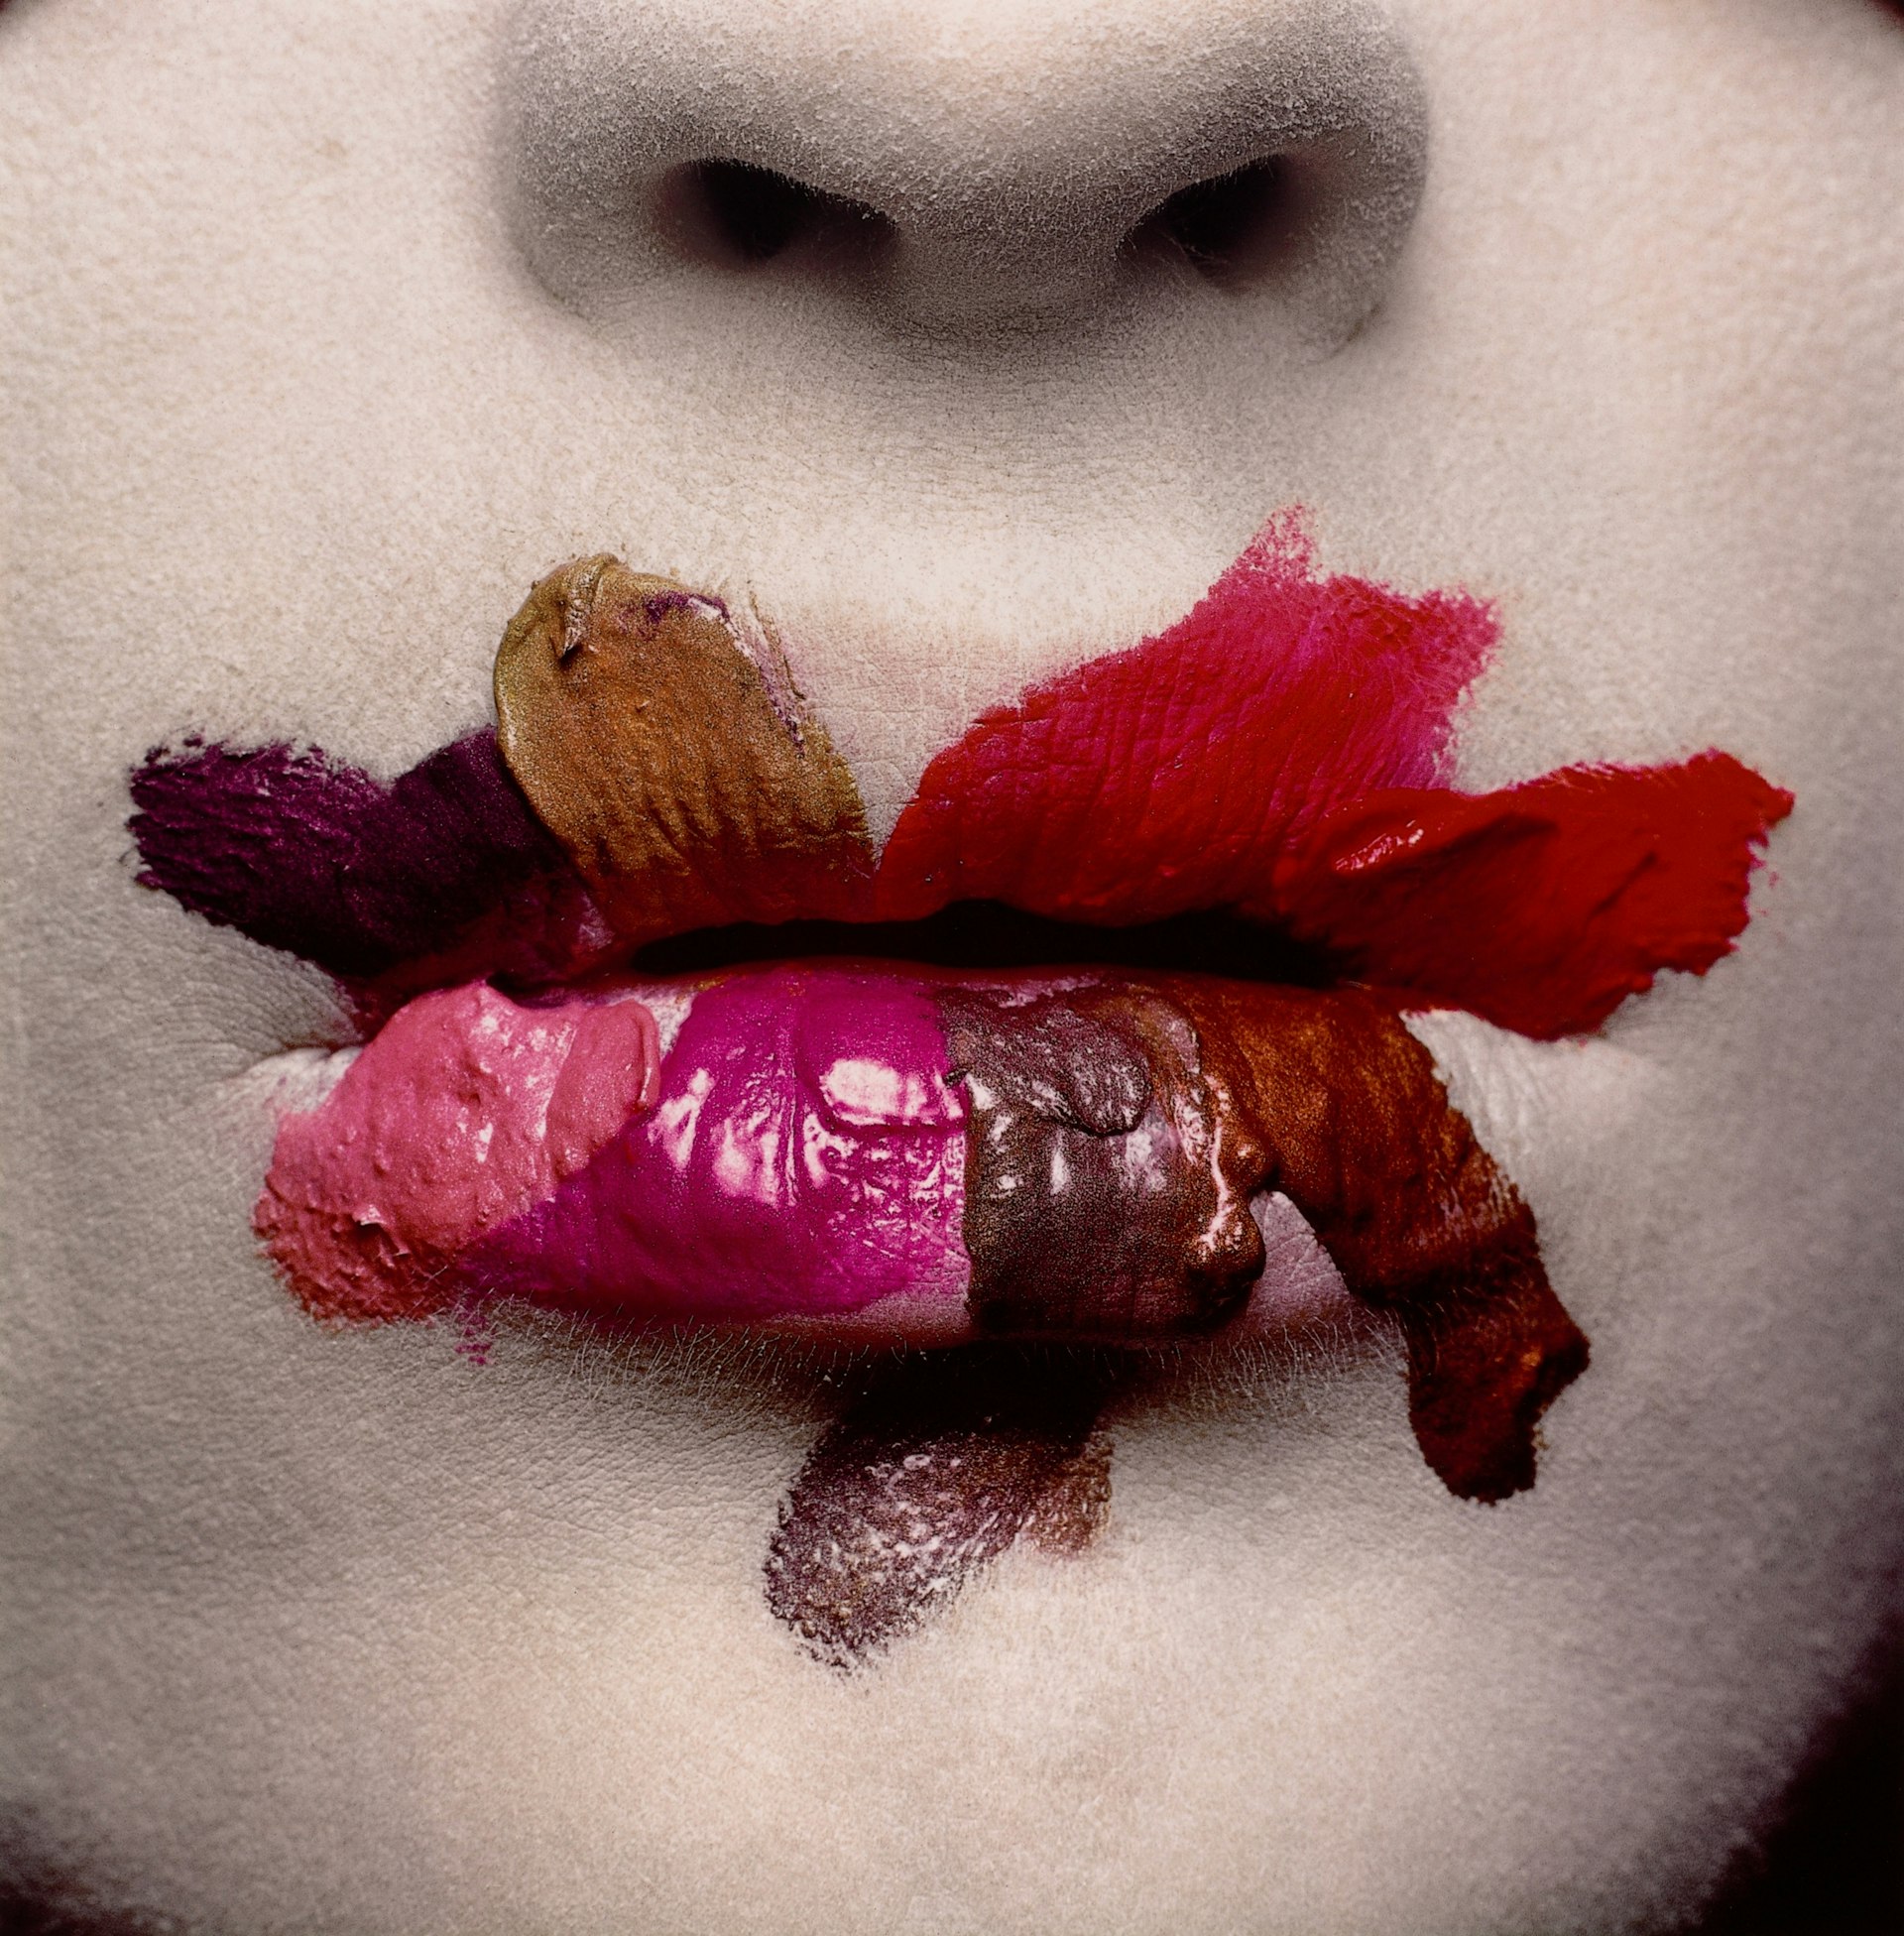 Exploring Irving Penn’s subversive approach to photography